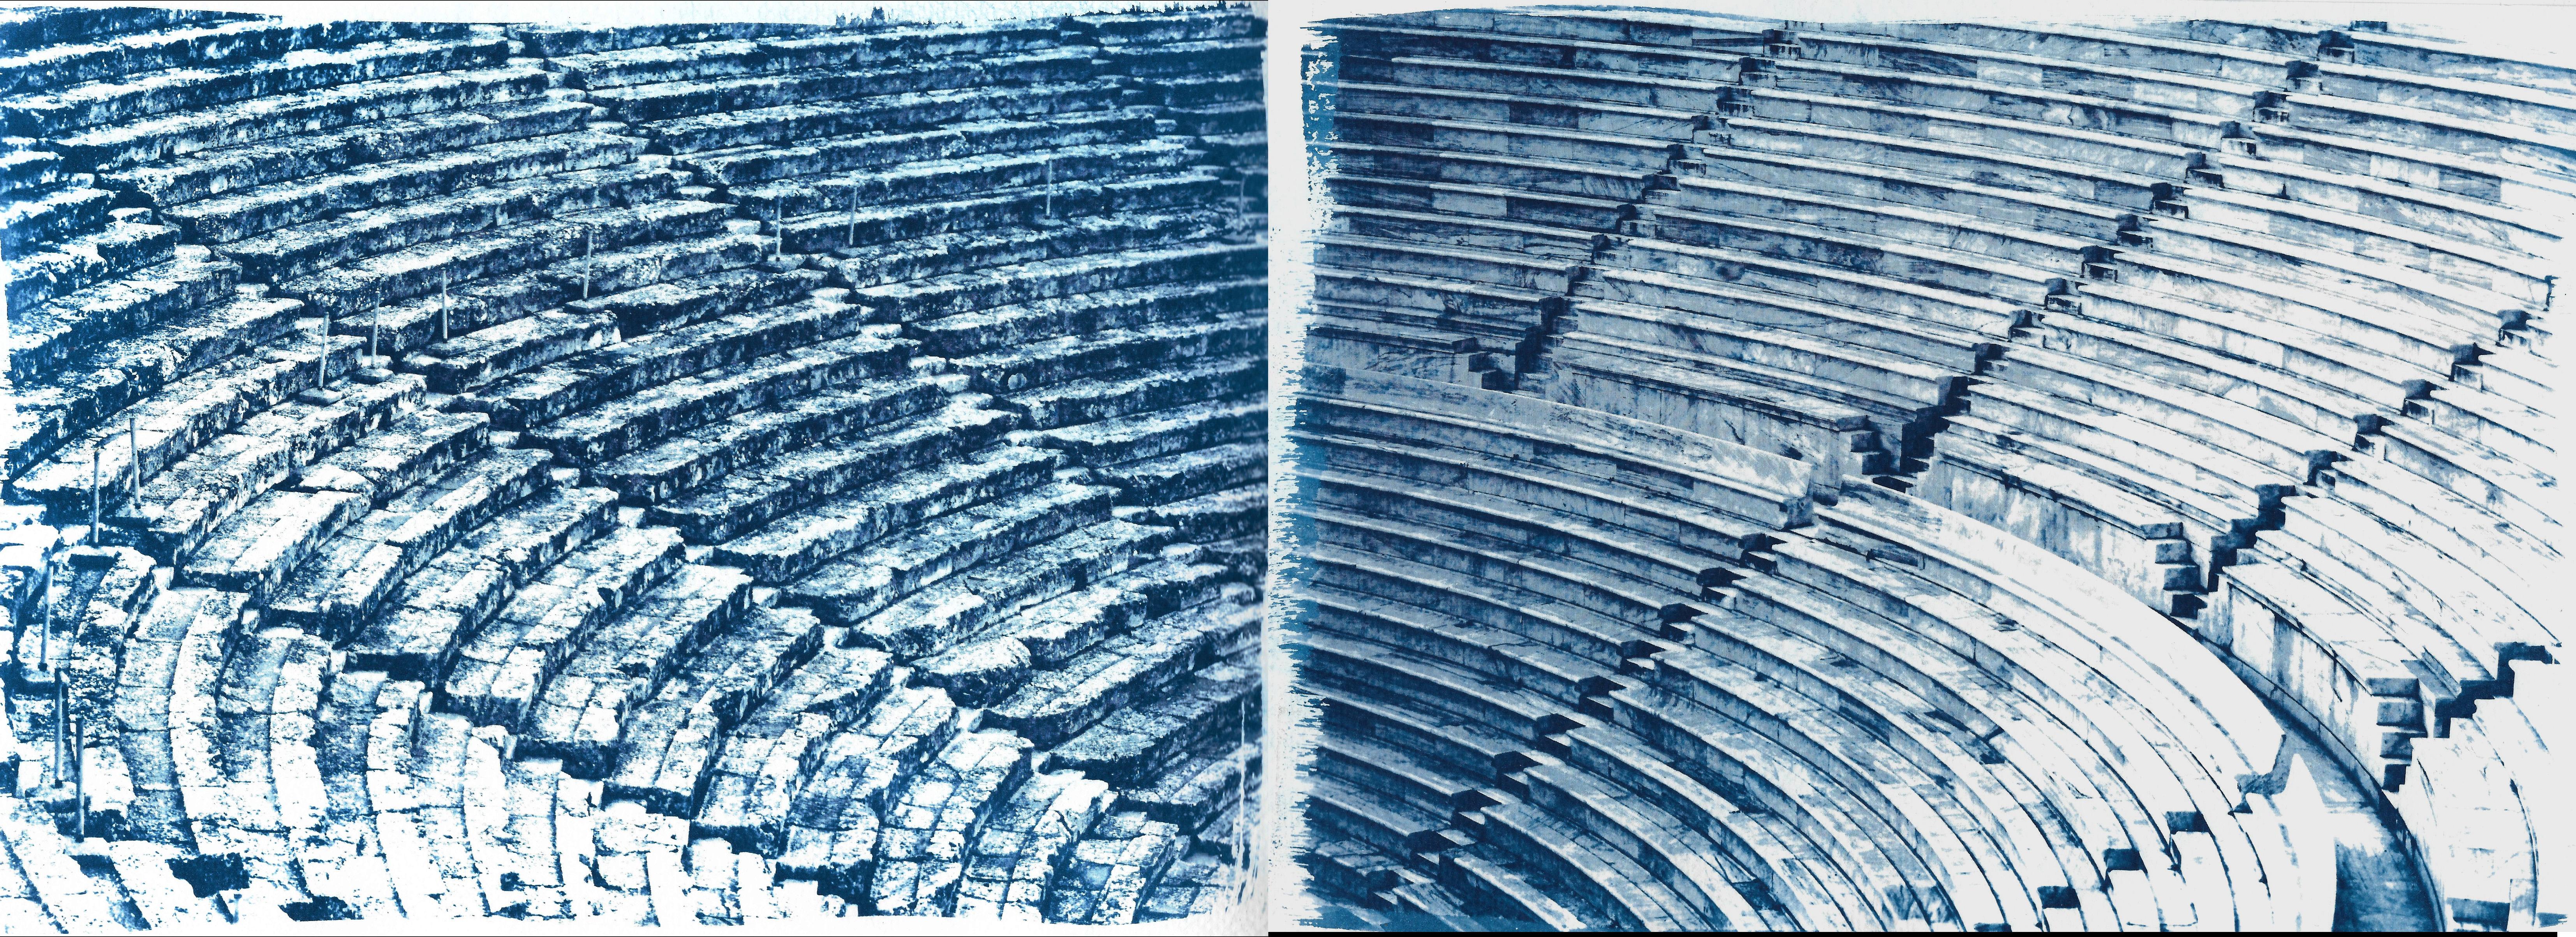 Kind of Cyan Landscape Photograph - Diptych of Ancient Theatre, Multi-panel Cyanotype, Greek and Roman Architecture